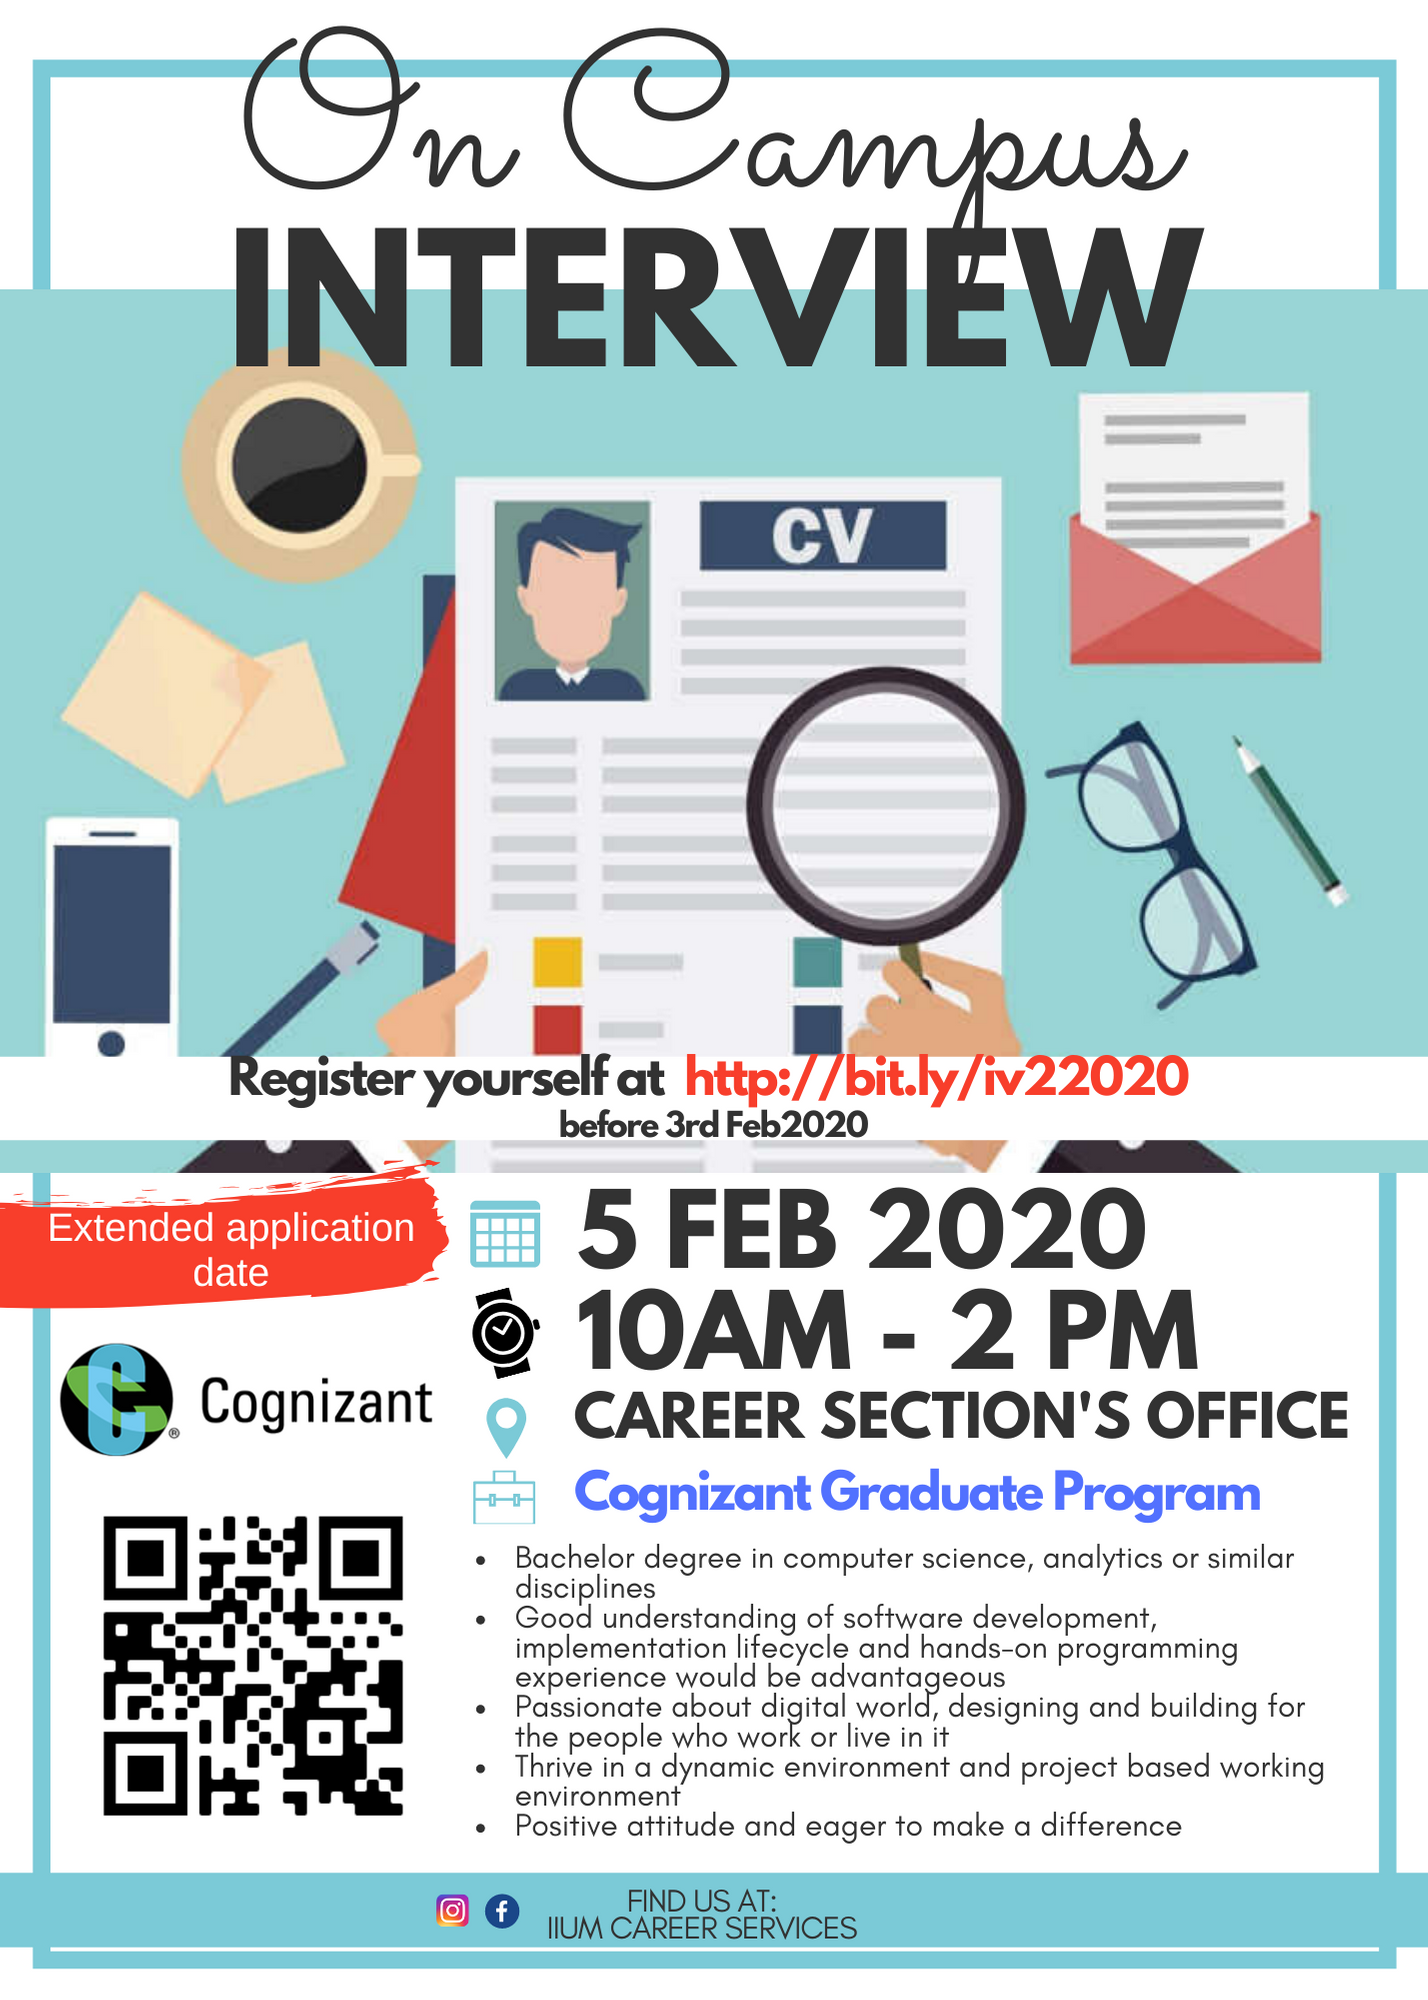 ON CAMPUS JOB INTERVIEW  WITH COGNIZANT